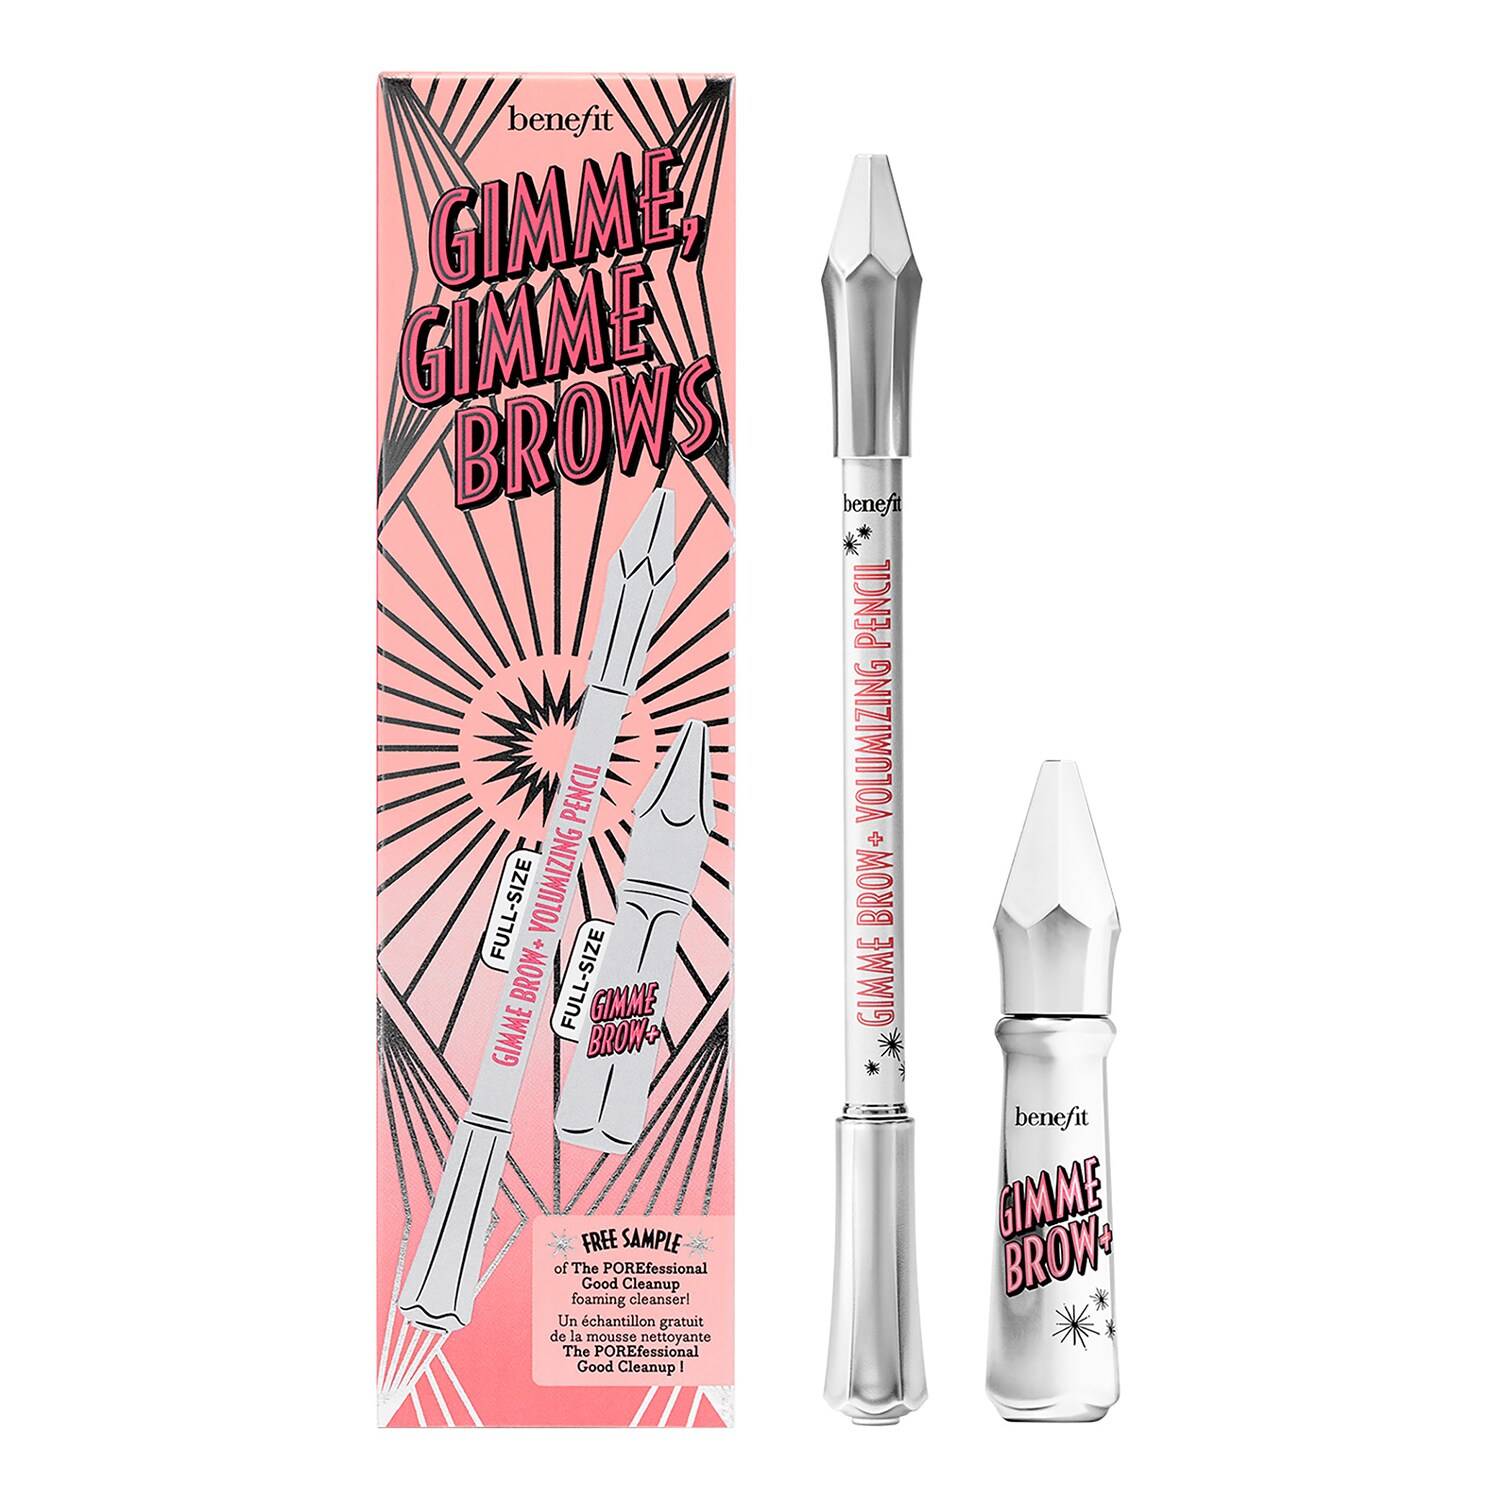 Benefit Cosmetics Gimme, Gimme Brows Set 2 Warm Golden Blonde